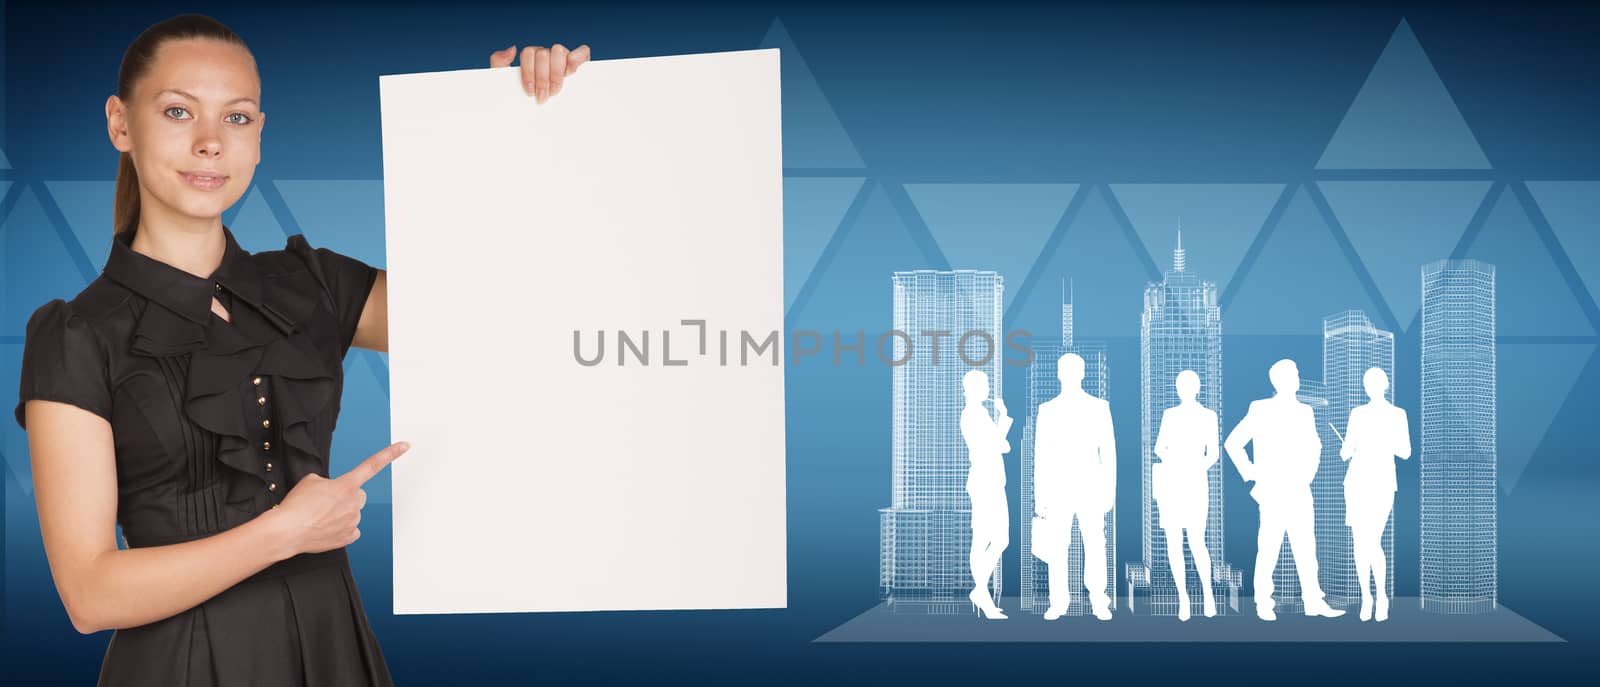 Beautiful businesswoman holding empty paper sheet, spatial layouts of buildings and silhouettes of people. Triangles as backdrop